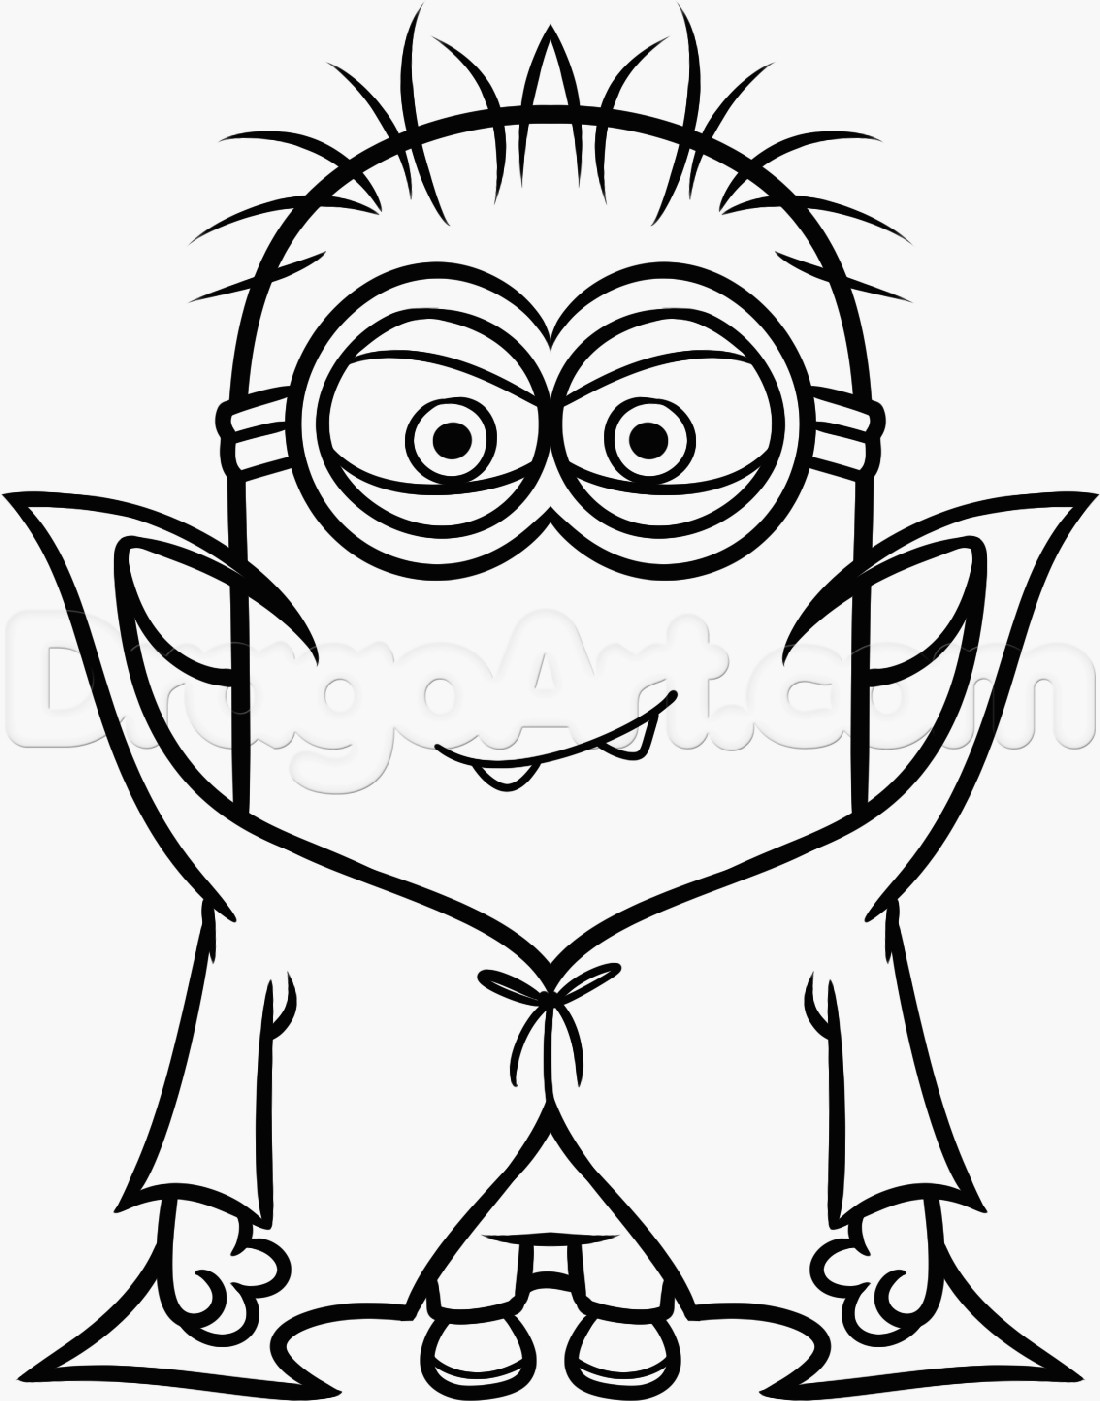 Free Printable Minions Coloring Pages
 Minion For Kids Download Free Colouring Pages